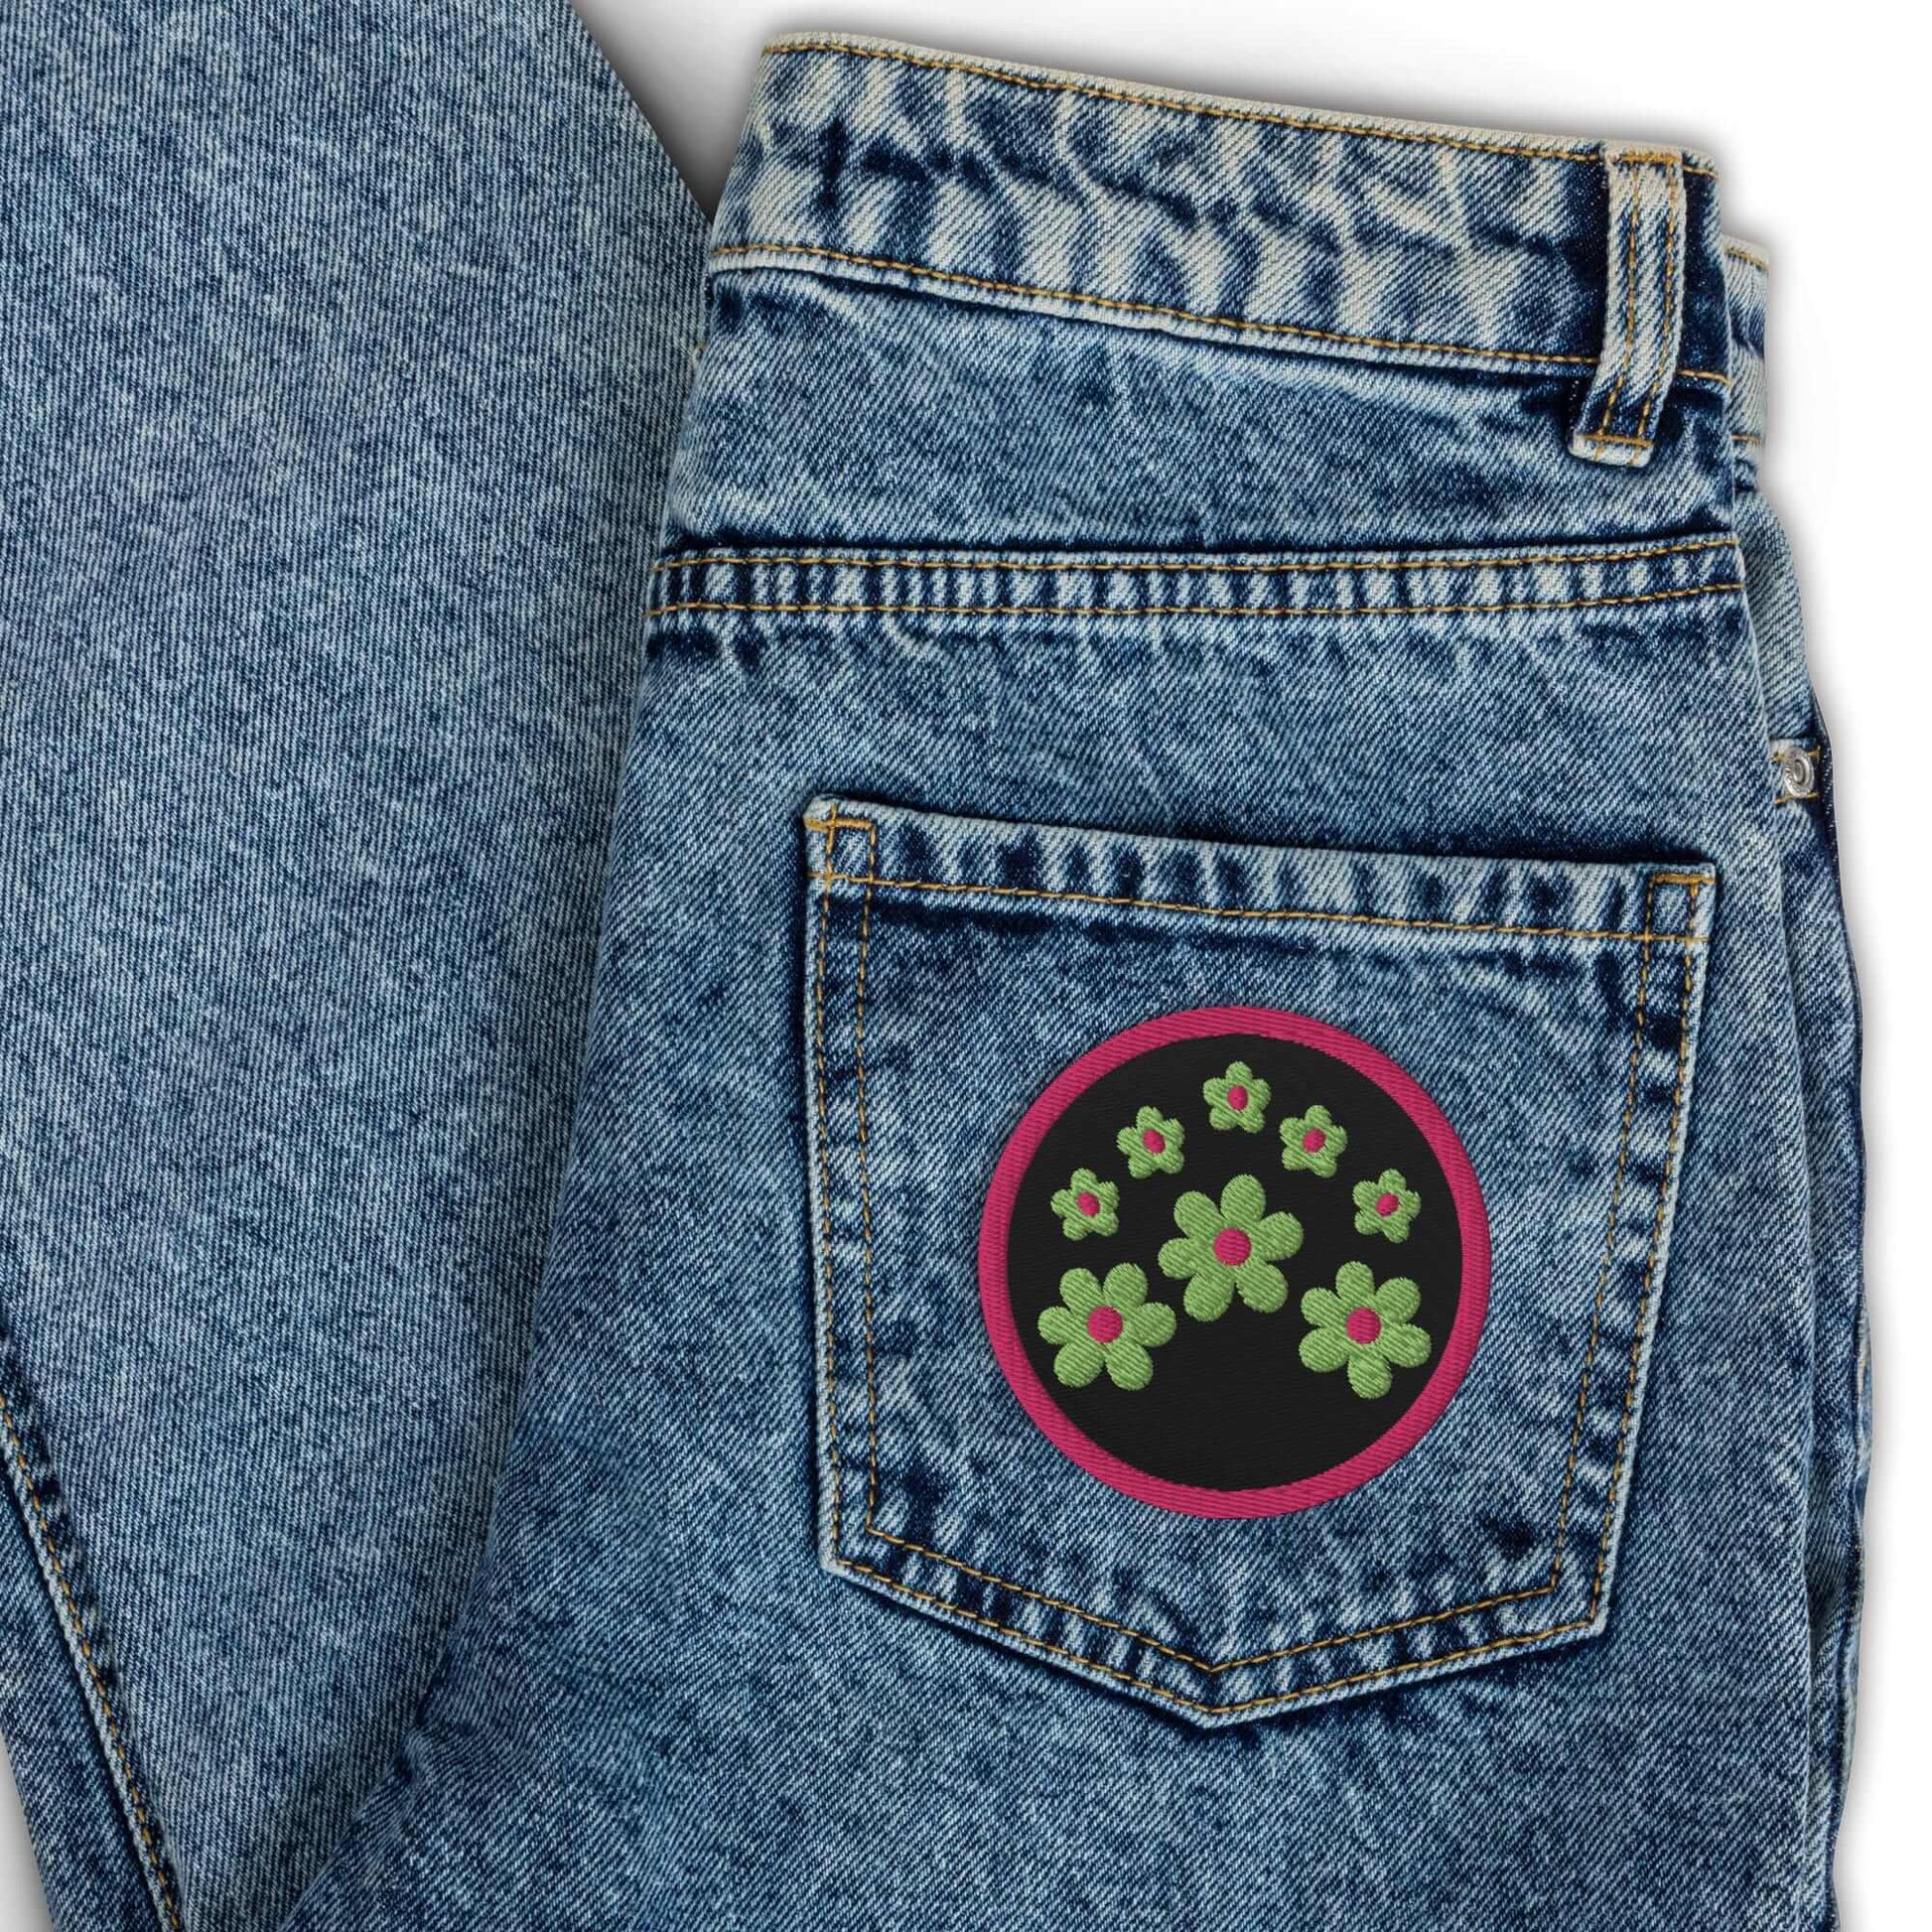 patches on jeans